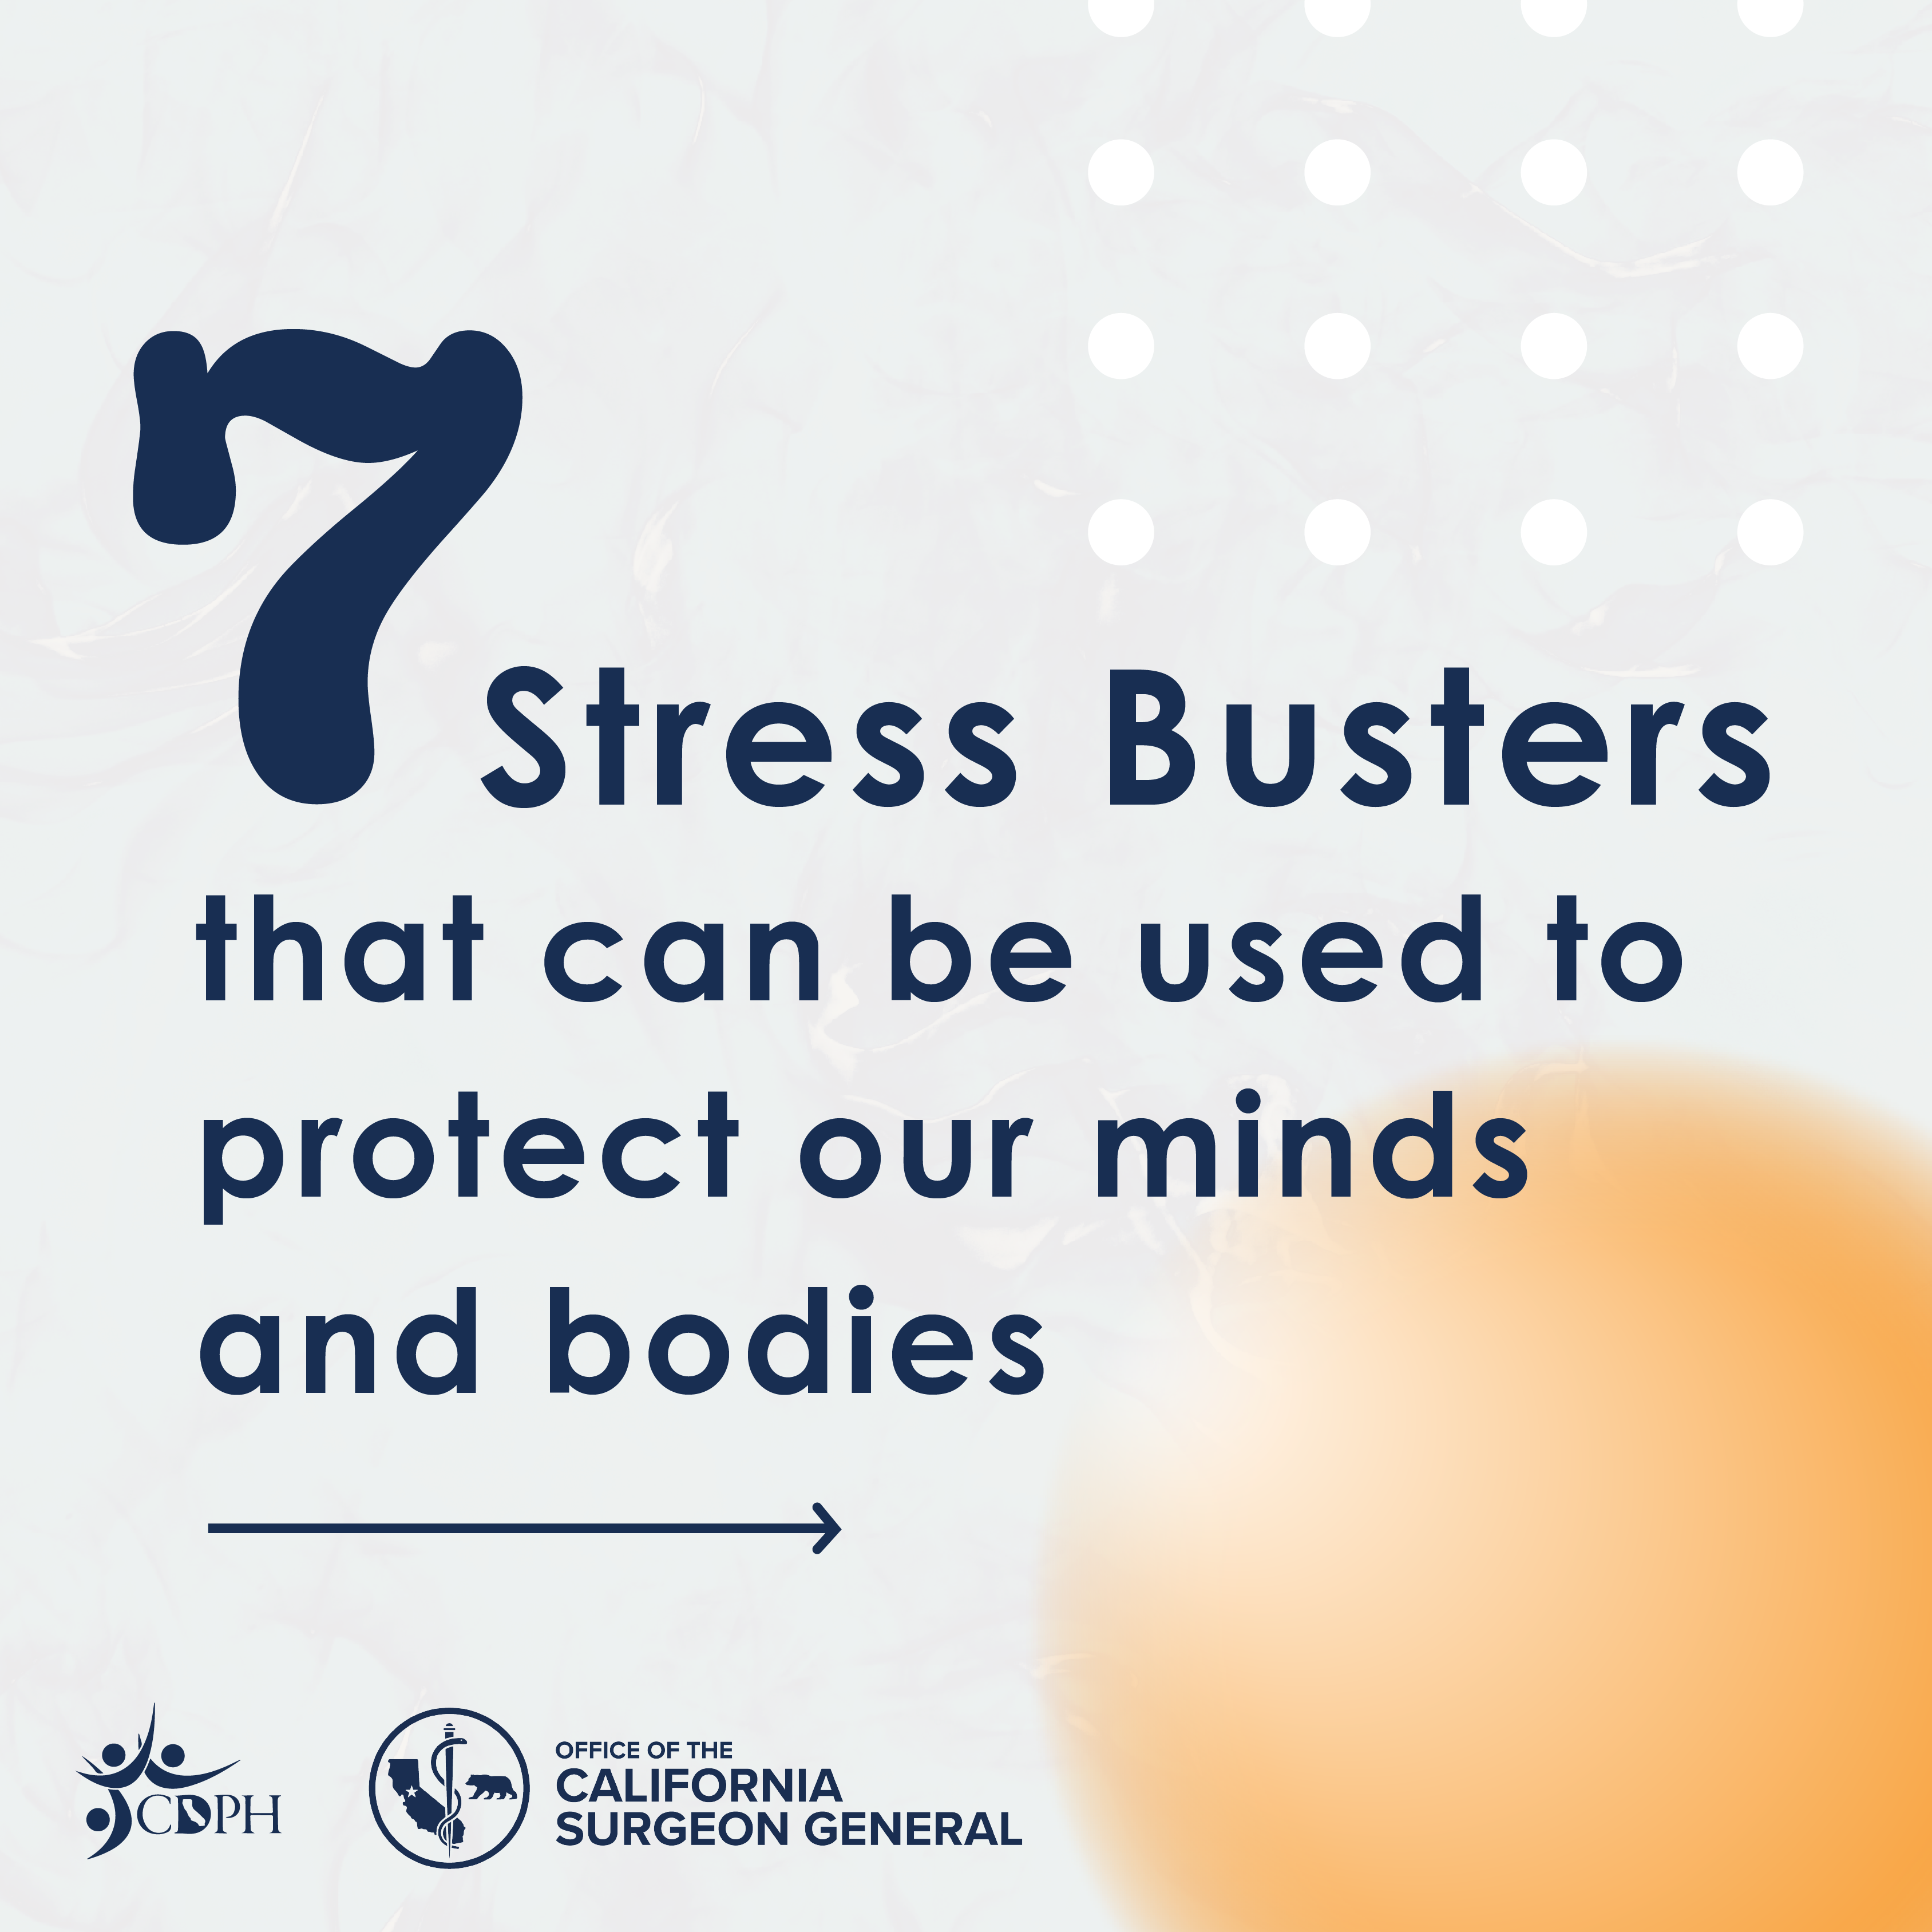 7 stress busters that can be used to protect our minds and bodies